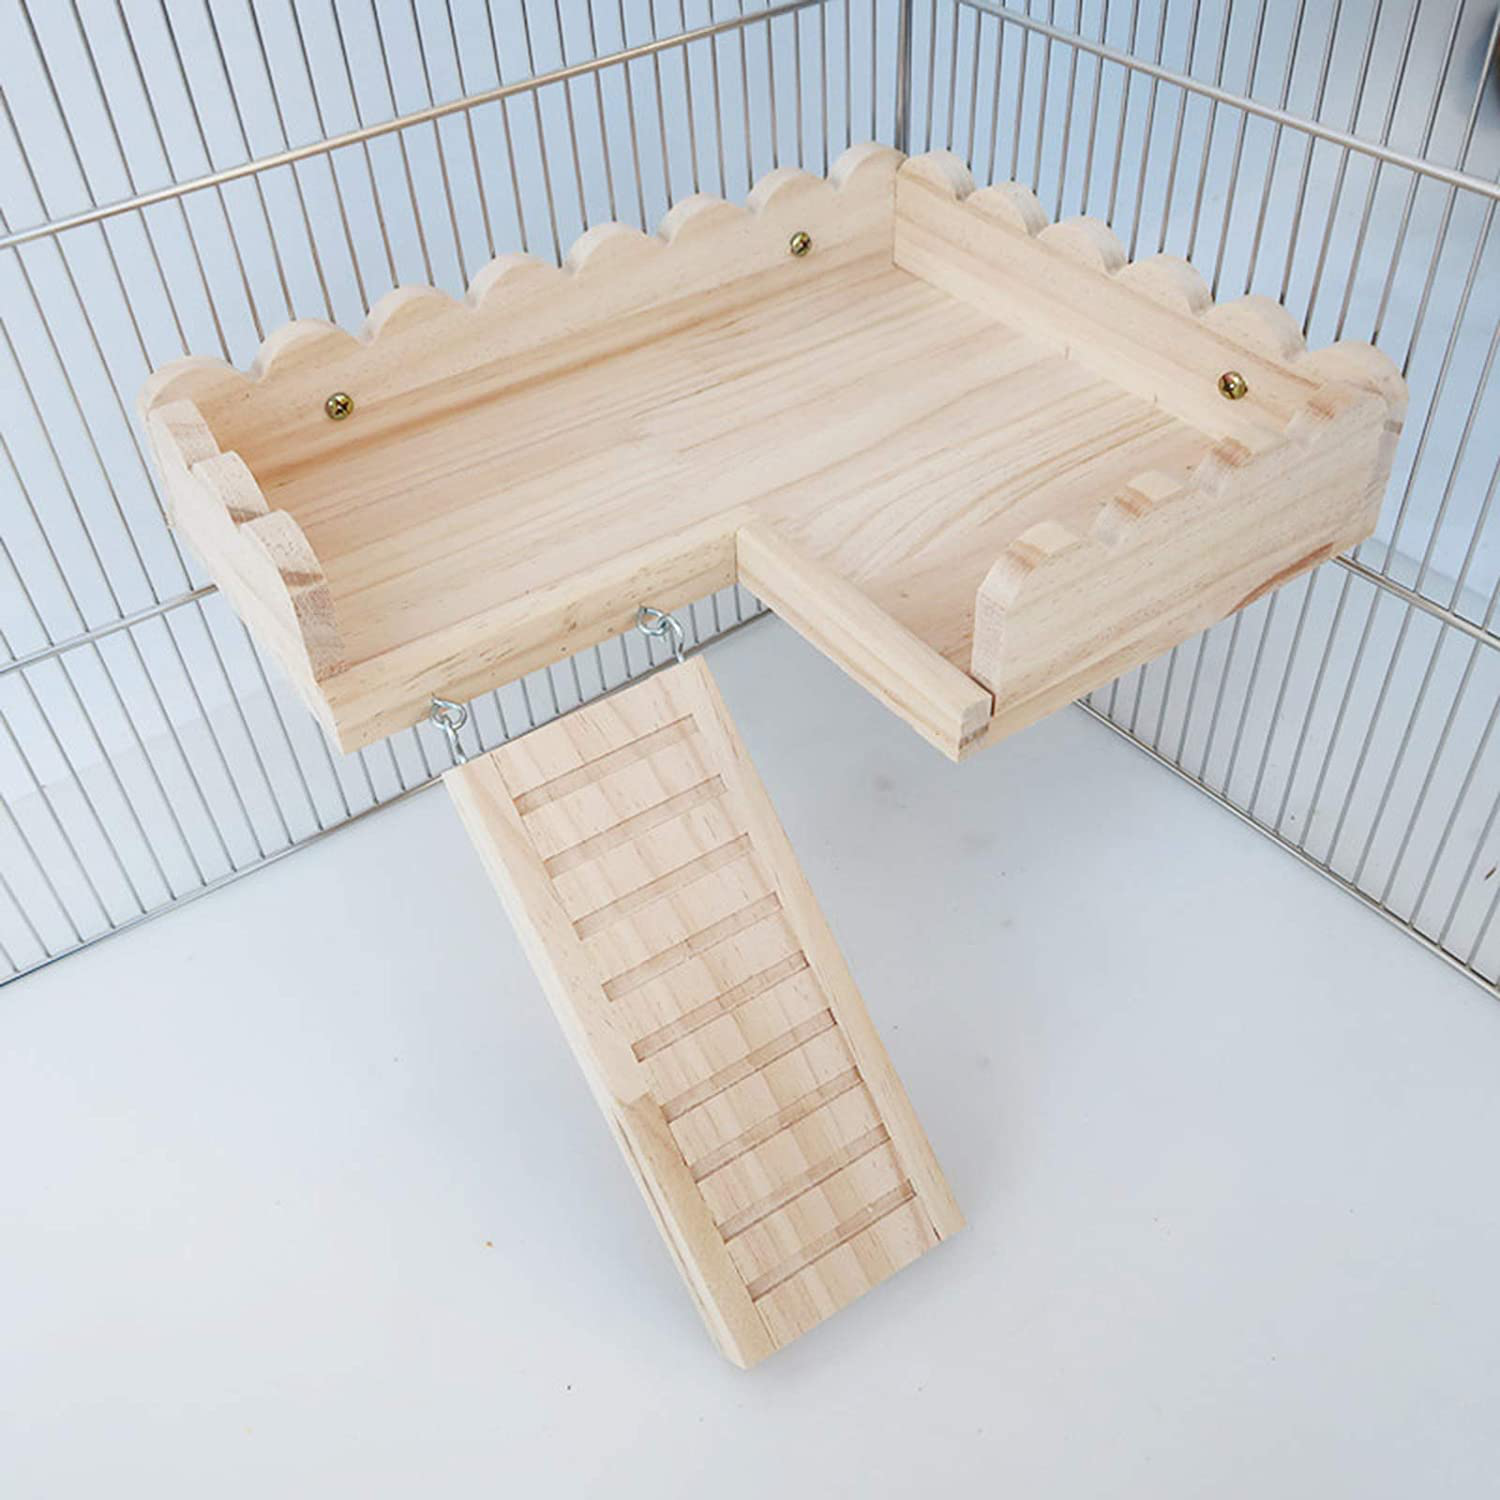 ROZKITCH Hamster Platform with Climbing Ladder, Bird Perch Cage Toy Wooden Play Gym Stand, Natural Pine Wood Tray for Chinchilla Squirrel Rabbit Guinea Pig, Birdcage Toy for Parrot Conure Parakeet